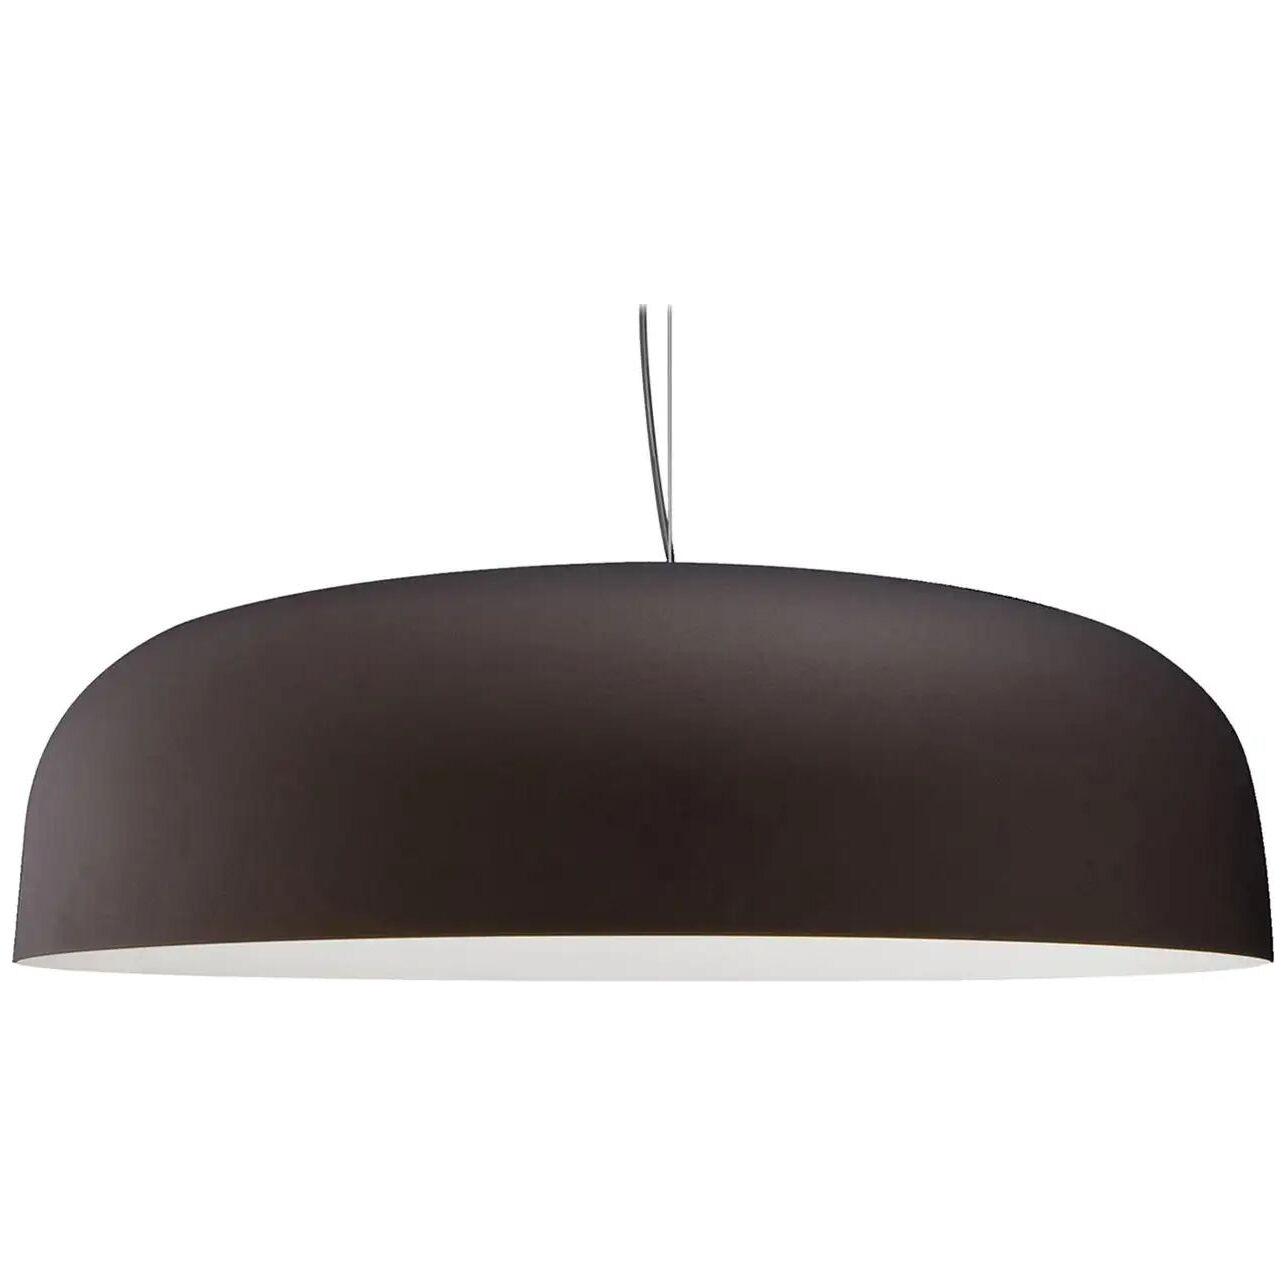 Francesco Rota Suspension Lamp 'Canopy' 421 Bronze and White by Oluce